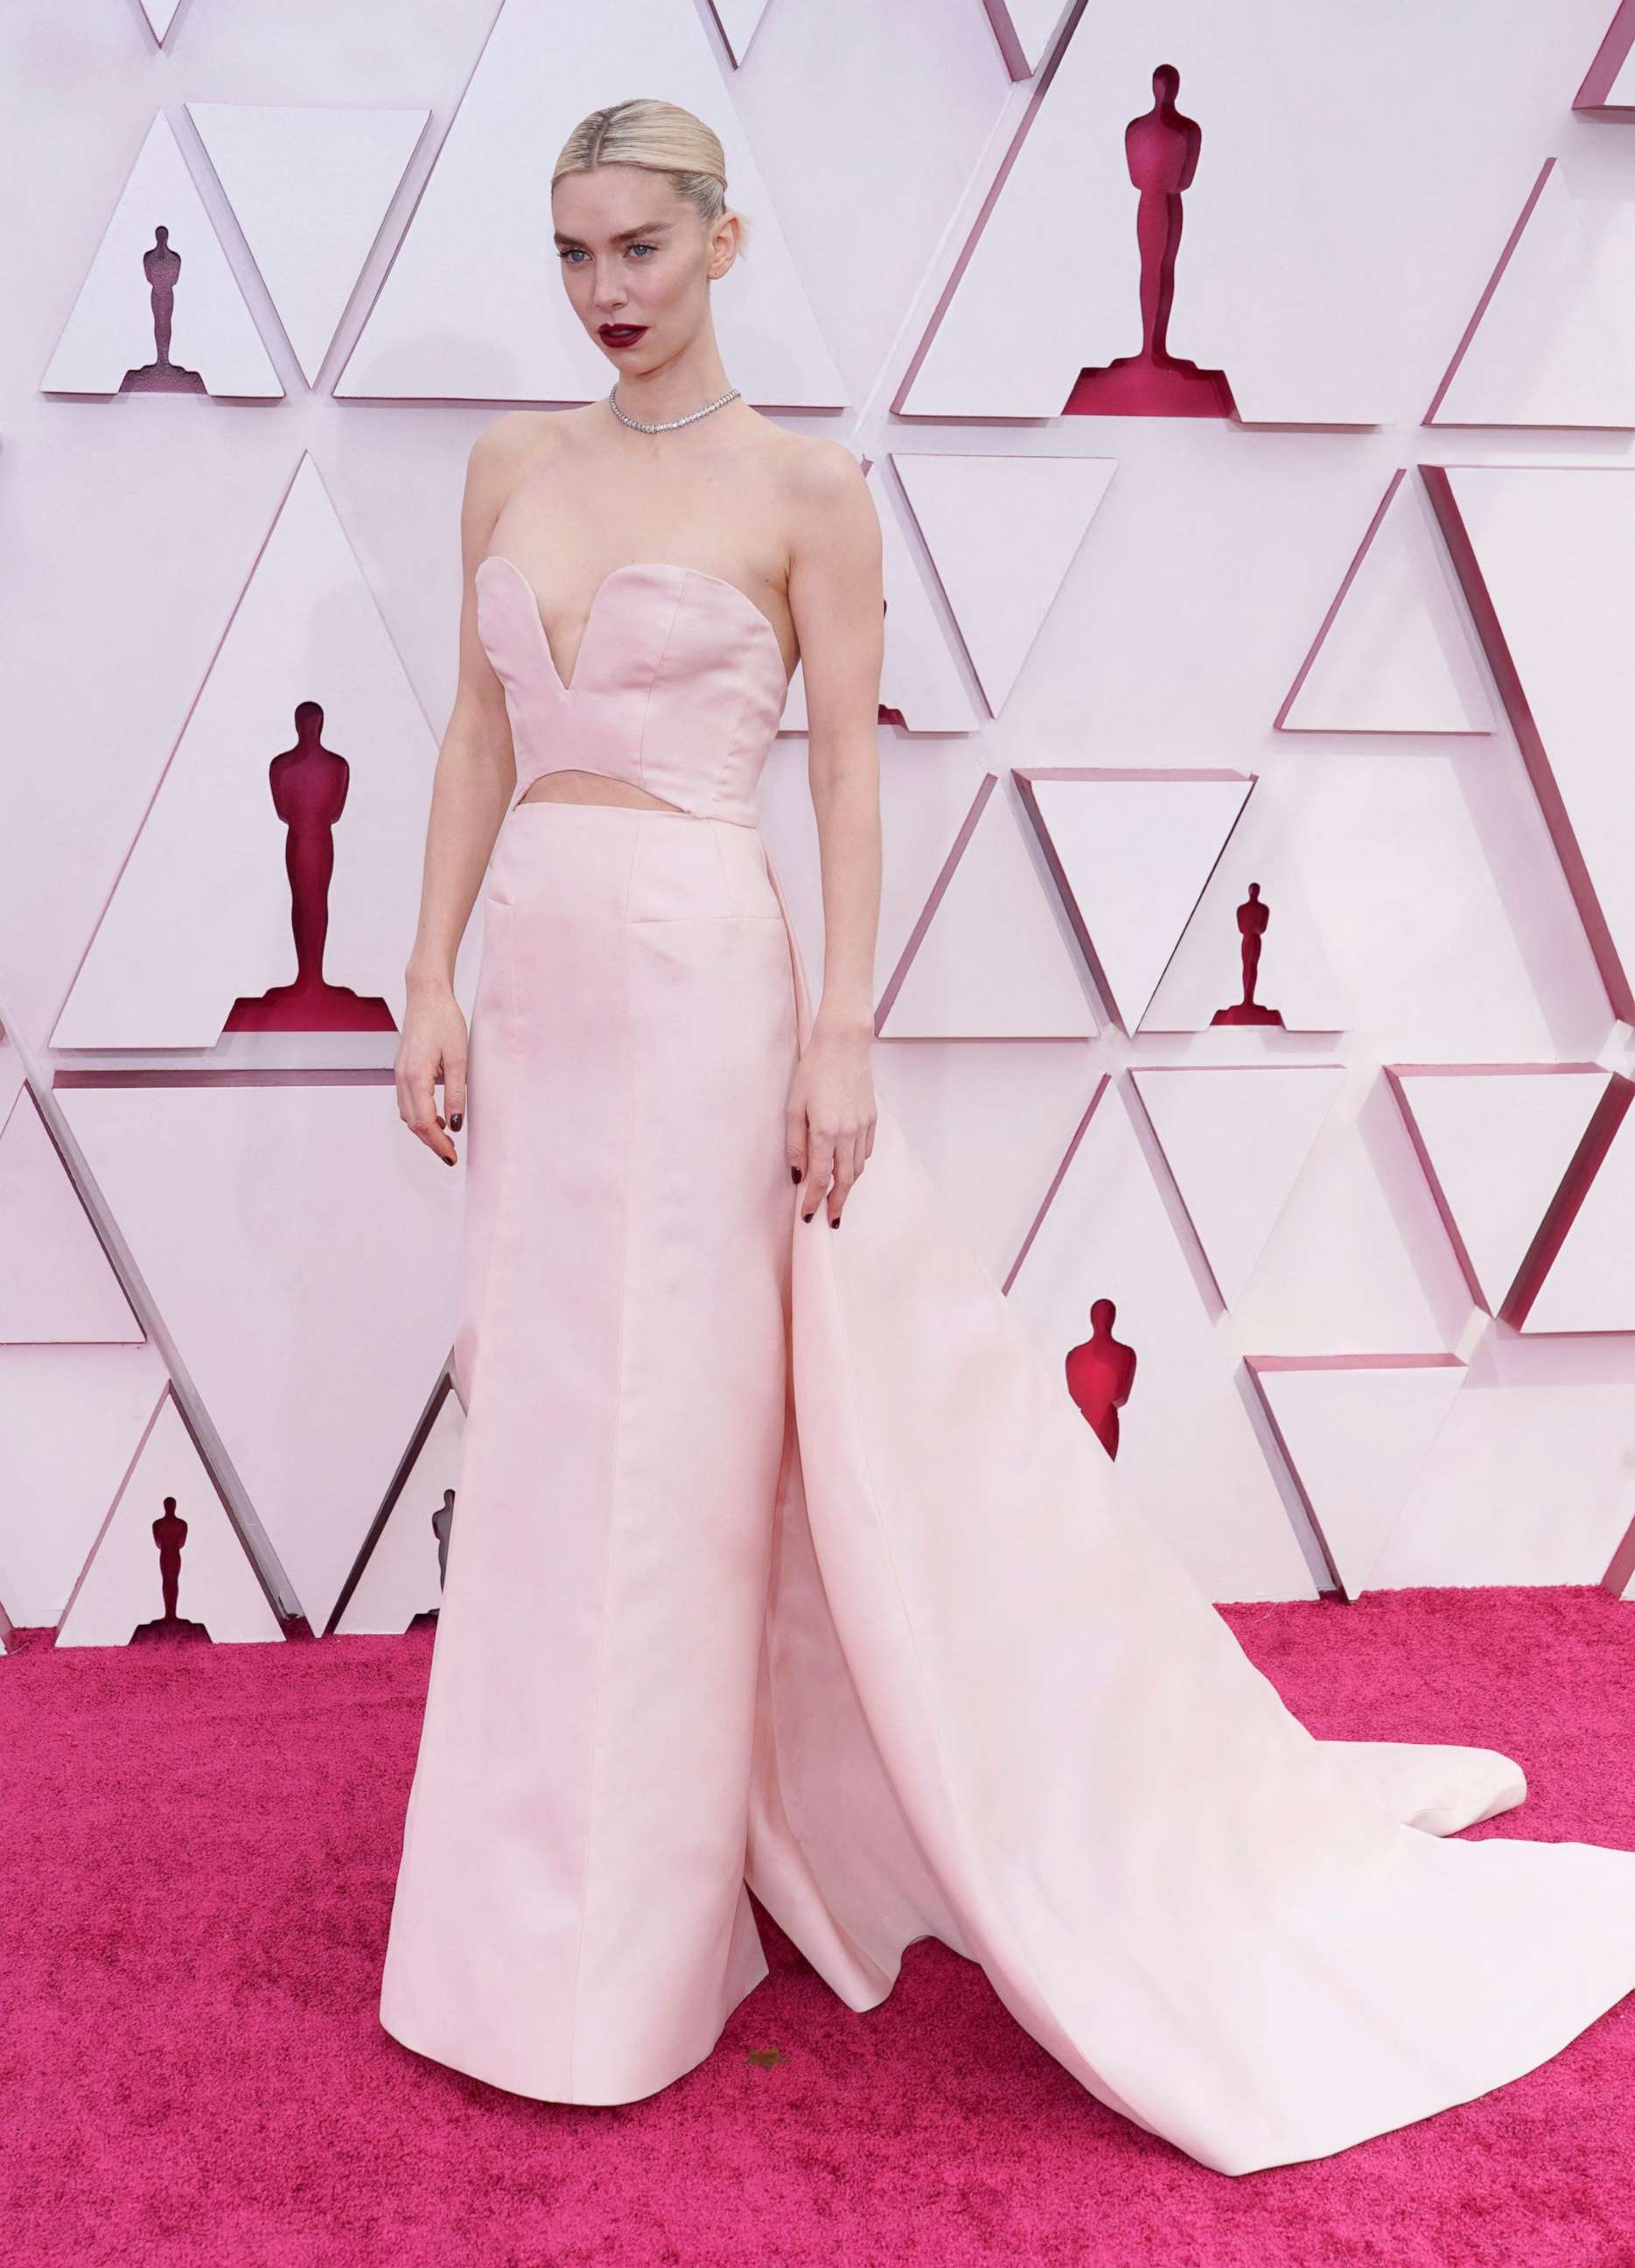 PHOTO: Vanessa Kirby, nominated for an Academy Award for Actress in a Leading Role for her performance in "Pieces of a Woman" arrives to the Oscars red carpet for the 93rd Academy Awards in Los Angeles, April 25, 2021.